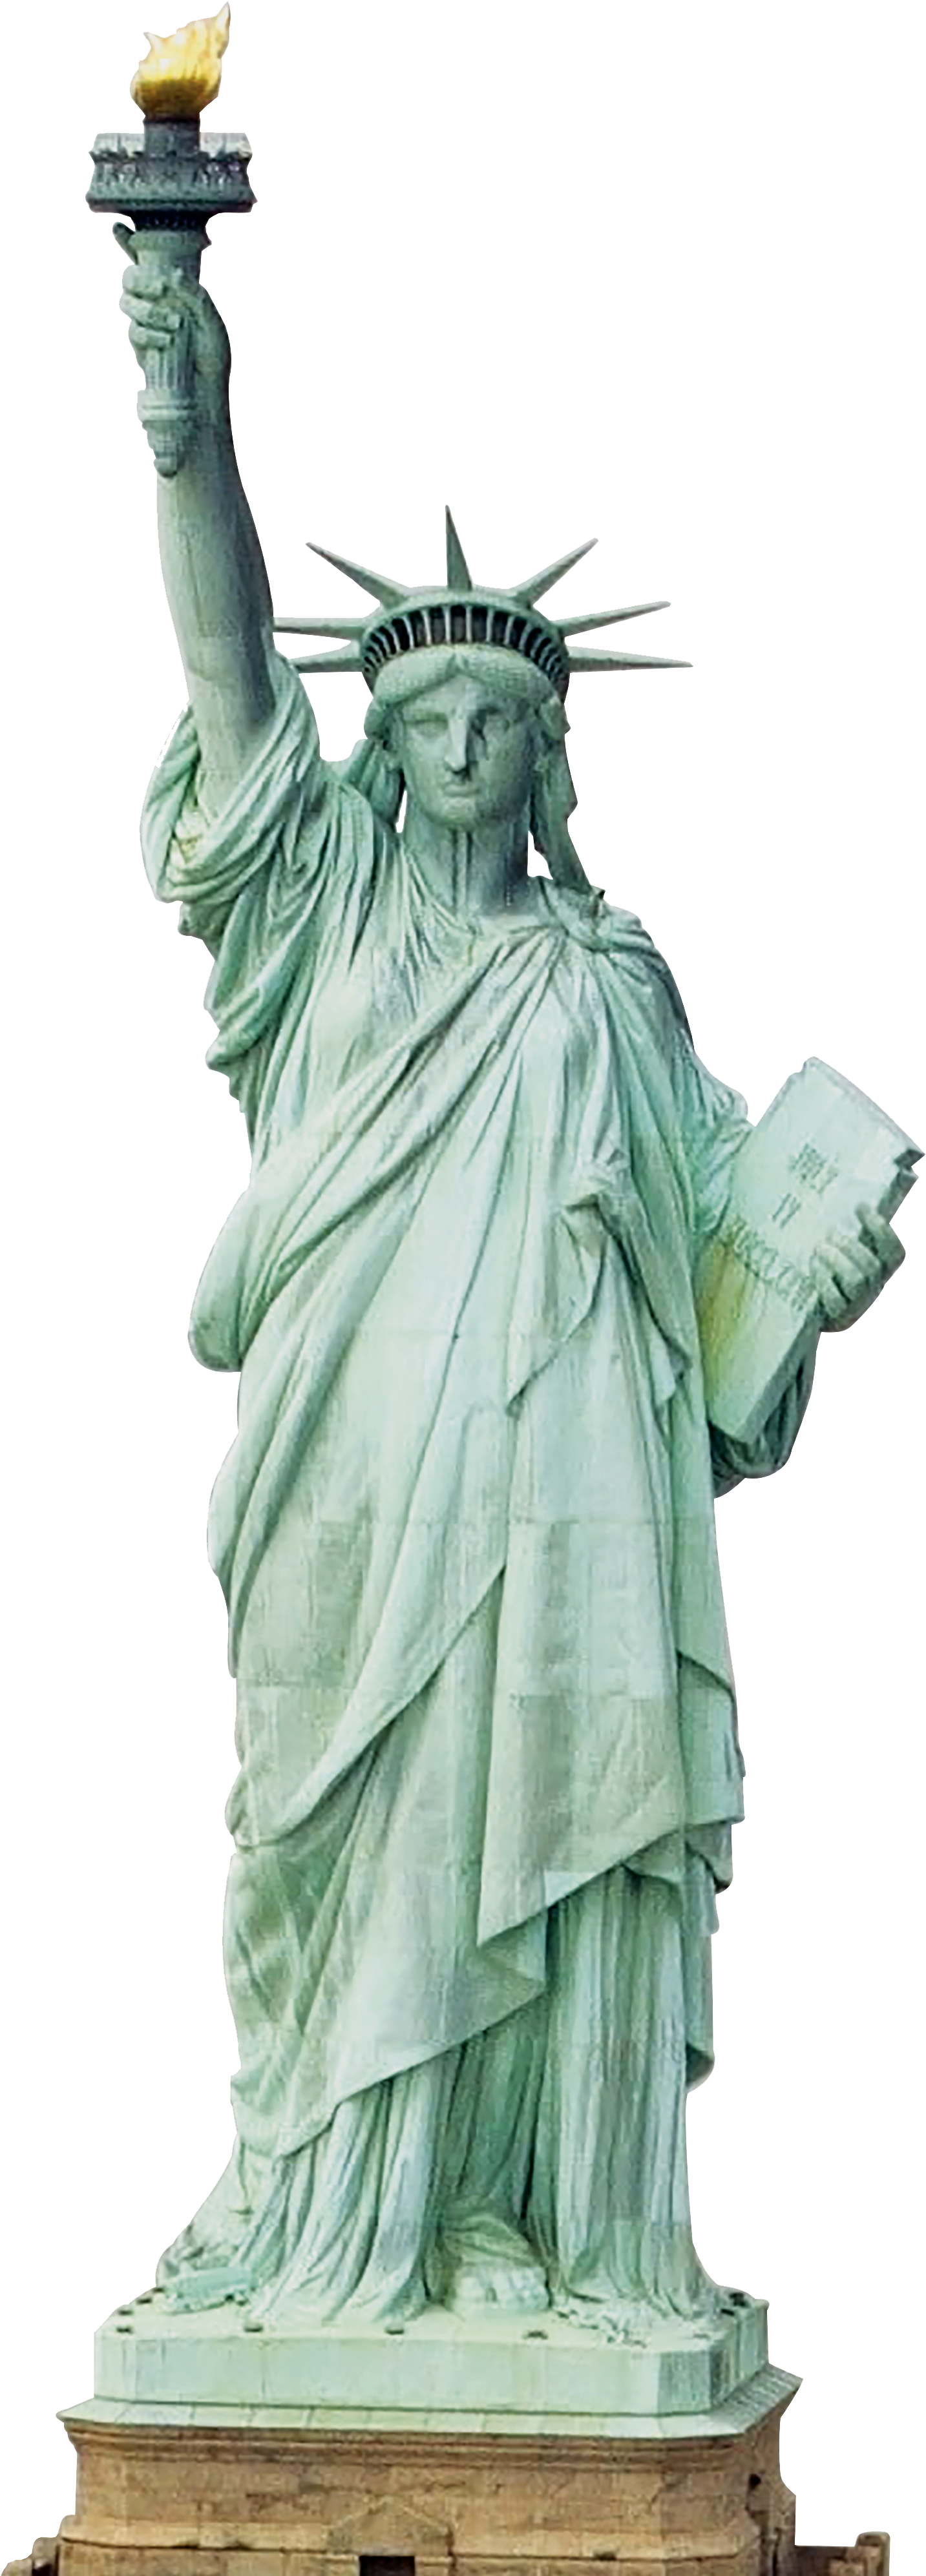 A Statue Of A Woman Holding A Book